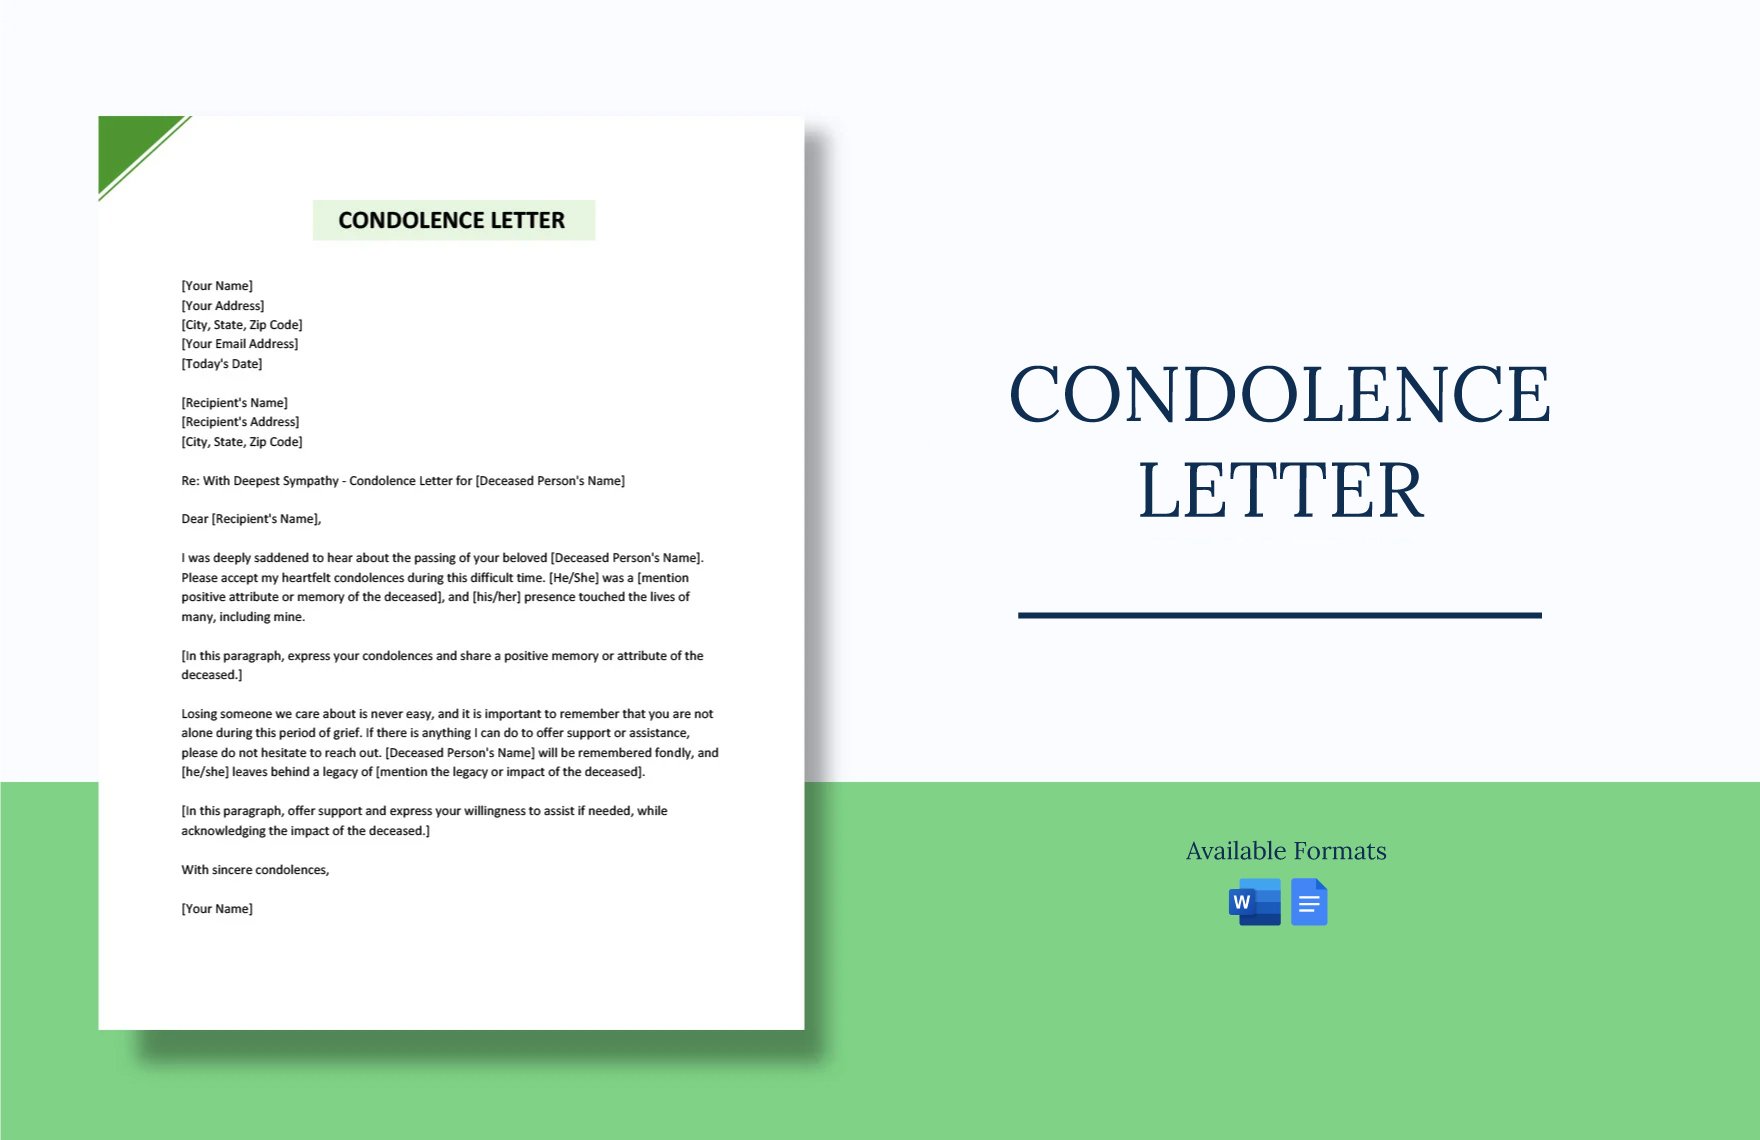 Condolence Letter in Word, Google Docs